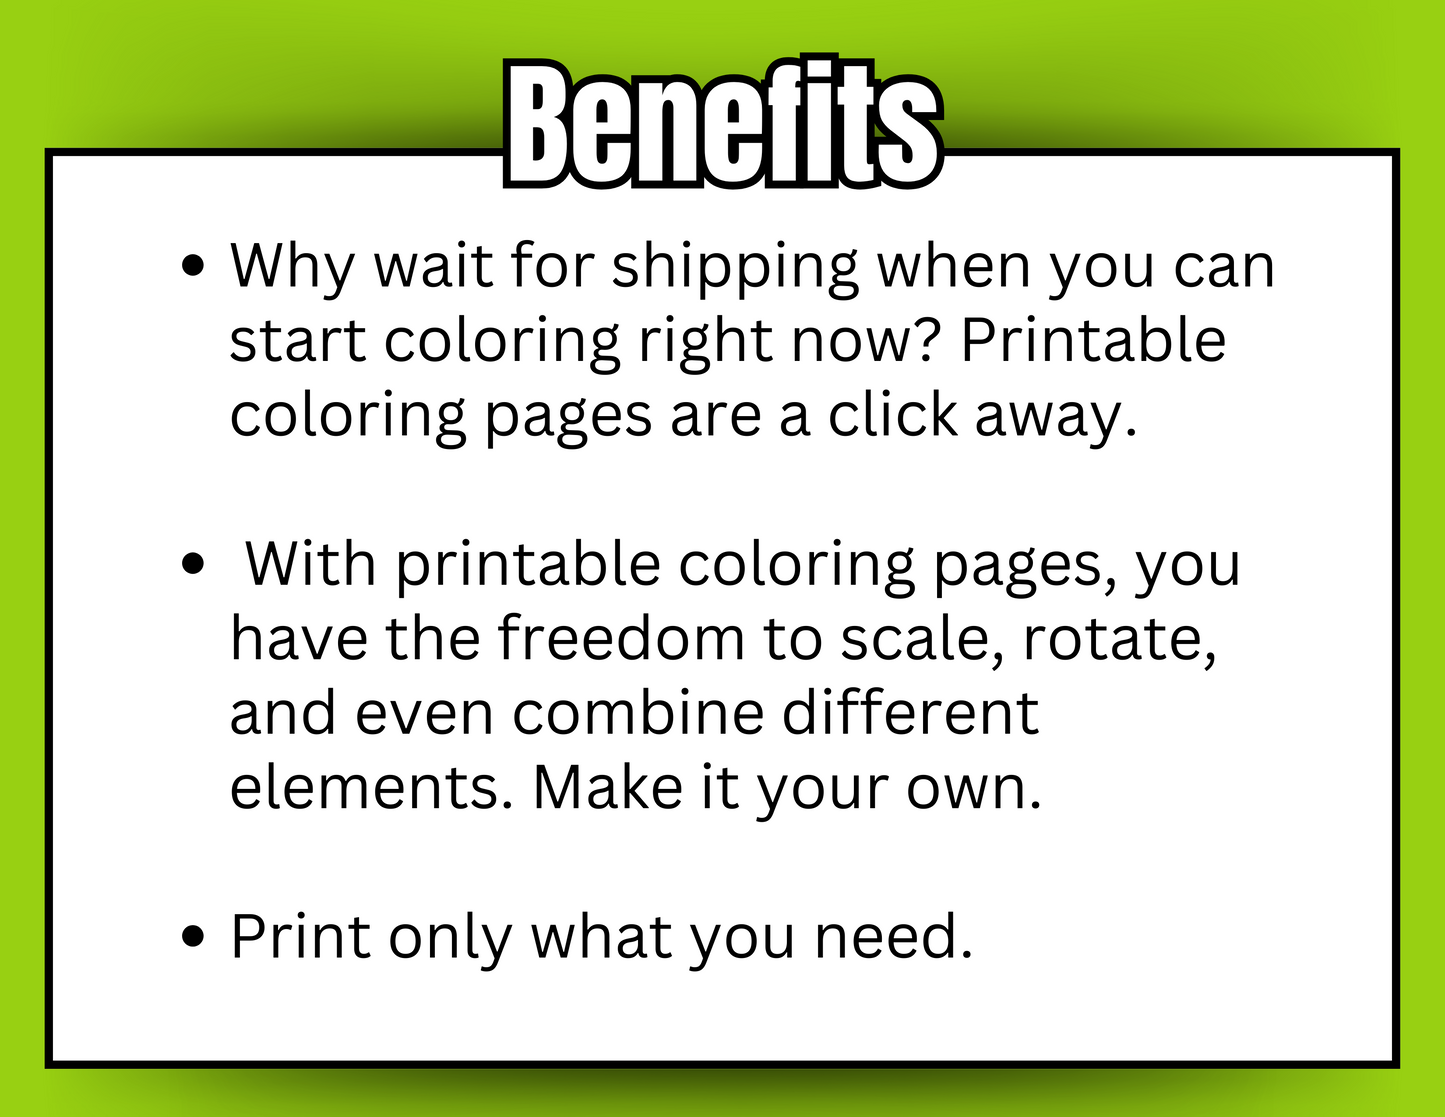 002-EB | PLR Coloring Pages, Prompt and a Bot | Pre-Black Friday Special for Small Business Owners